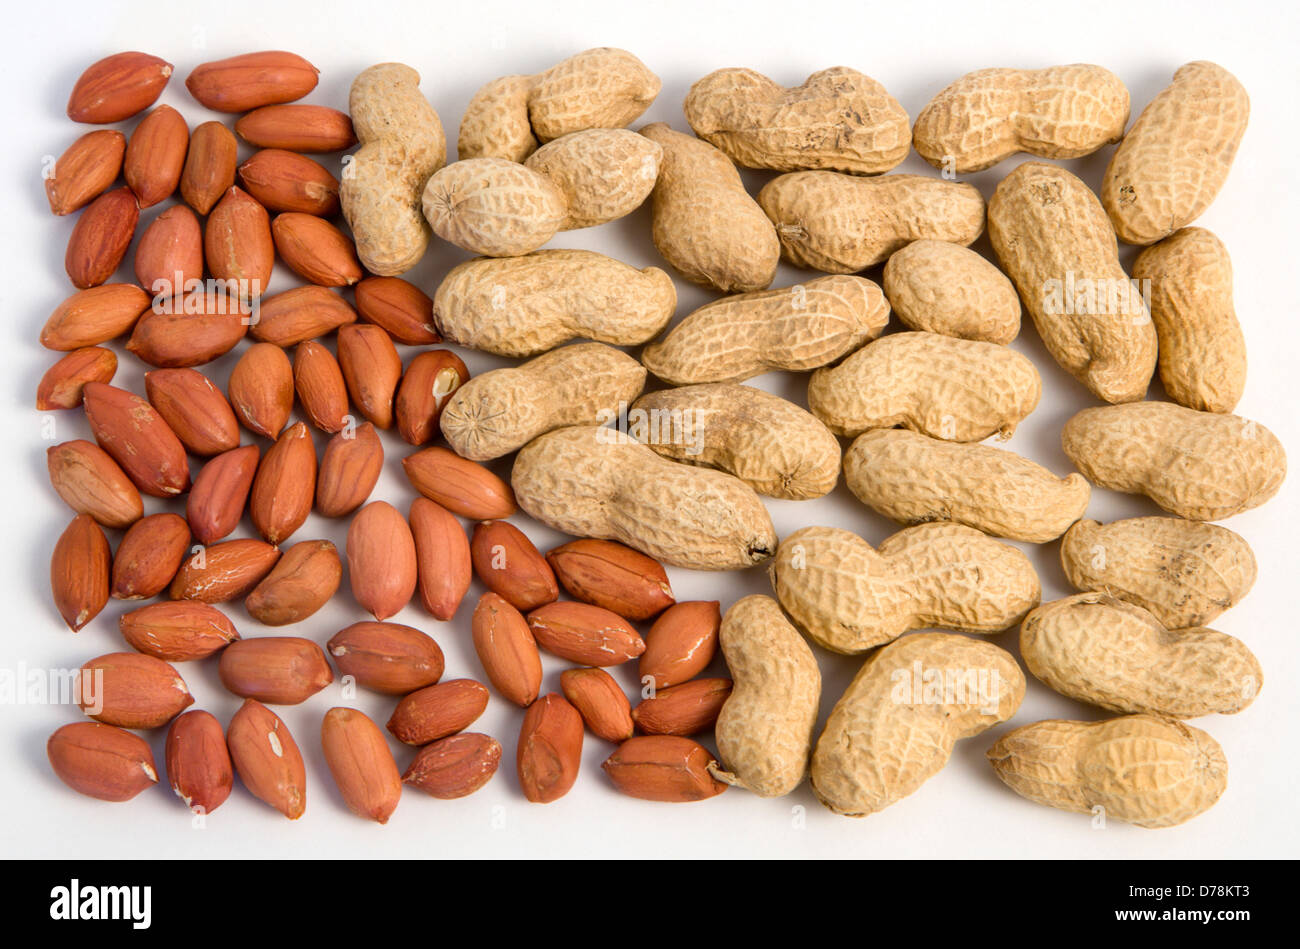 Groundnuts Peanuts and kernels on a white background. Stock Photo